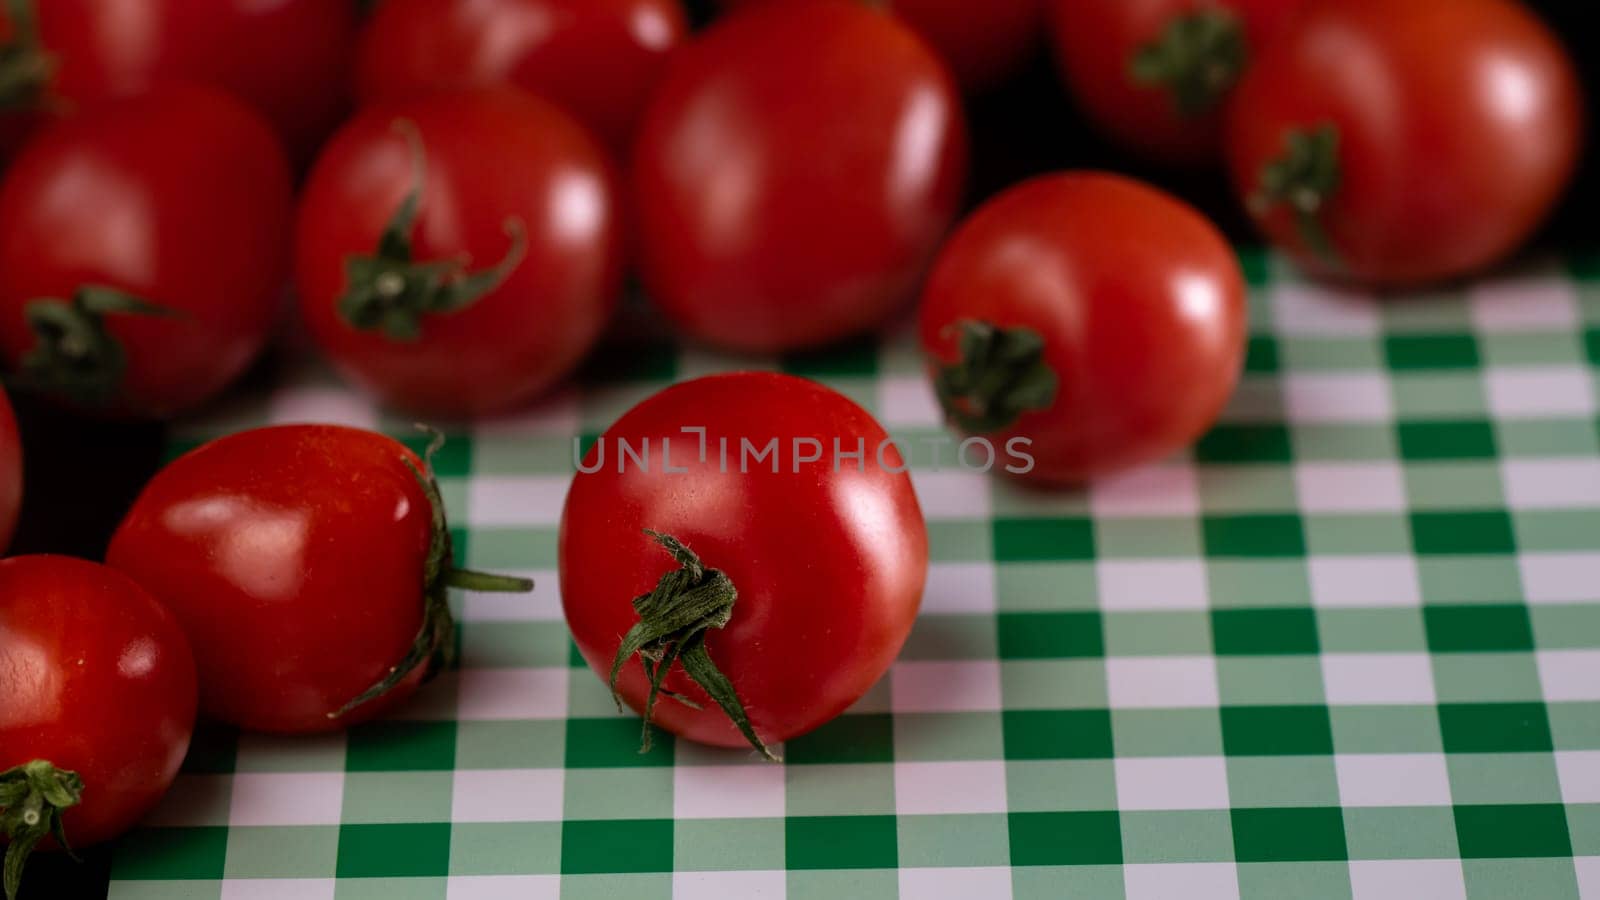 Selective focus on ripe delicious cherry tomatoes, close up